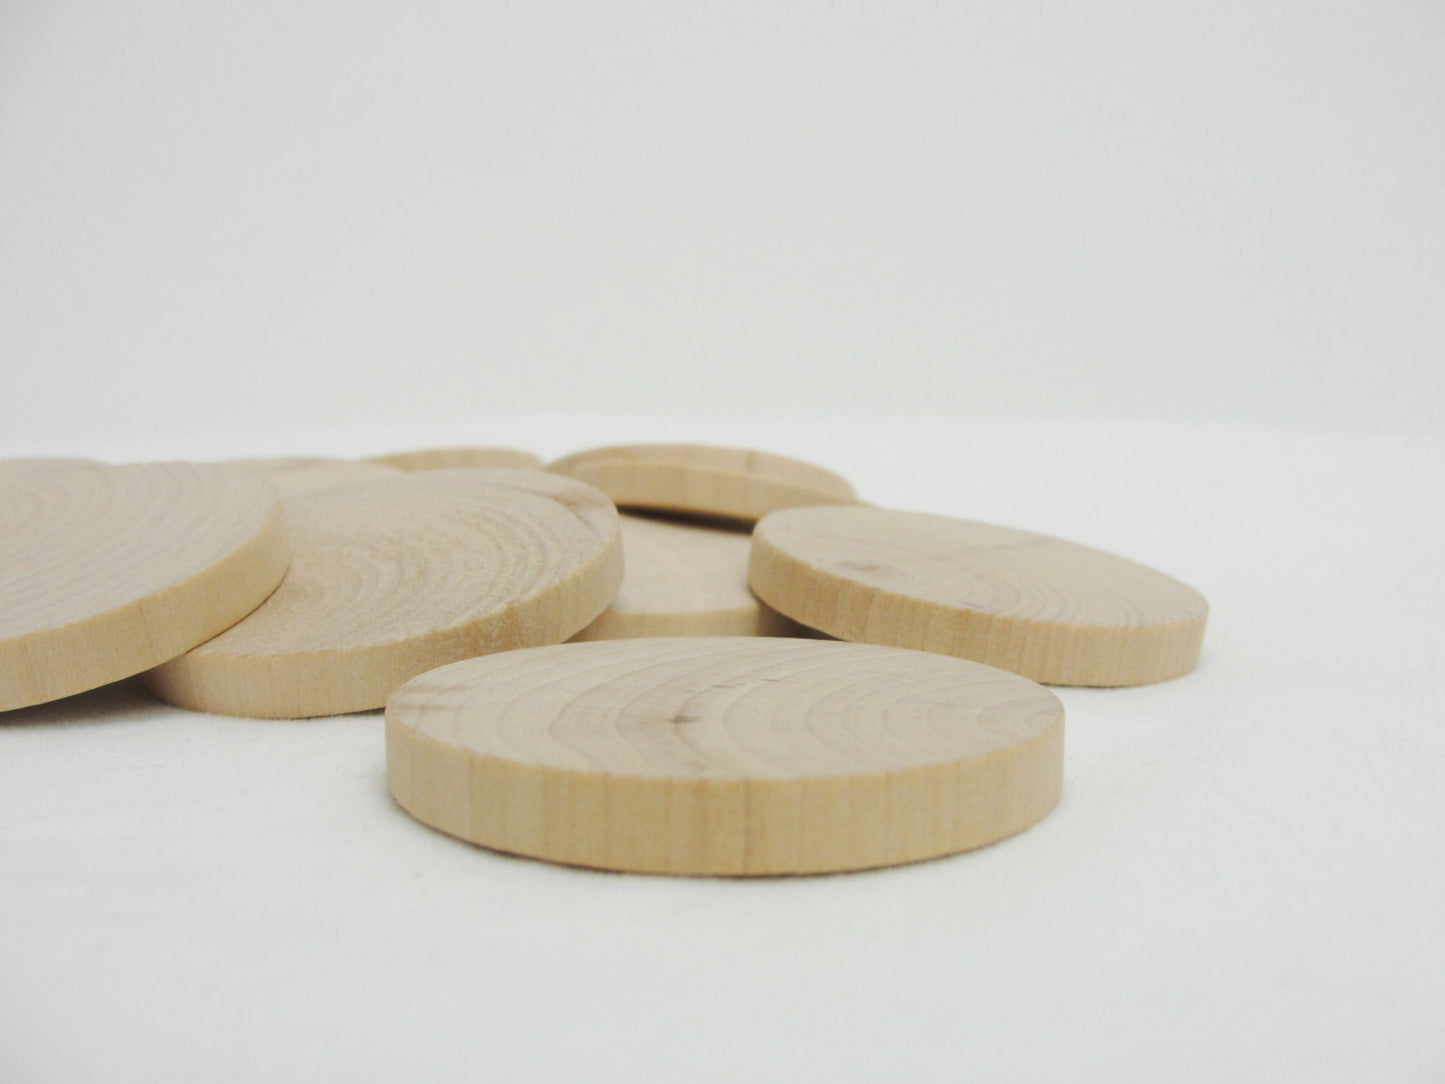 Wood Circles wooden discs 1 1/2" x 3/16" thick unfinished DIY